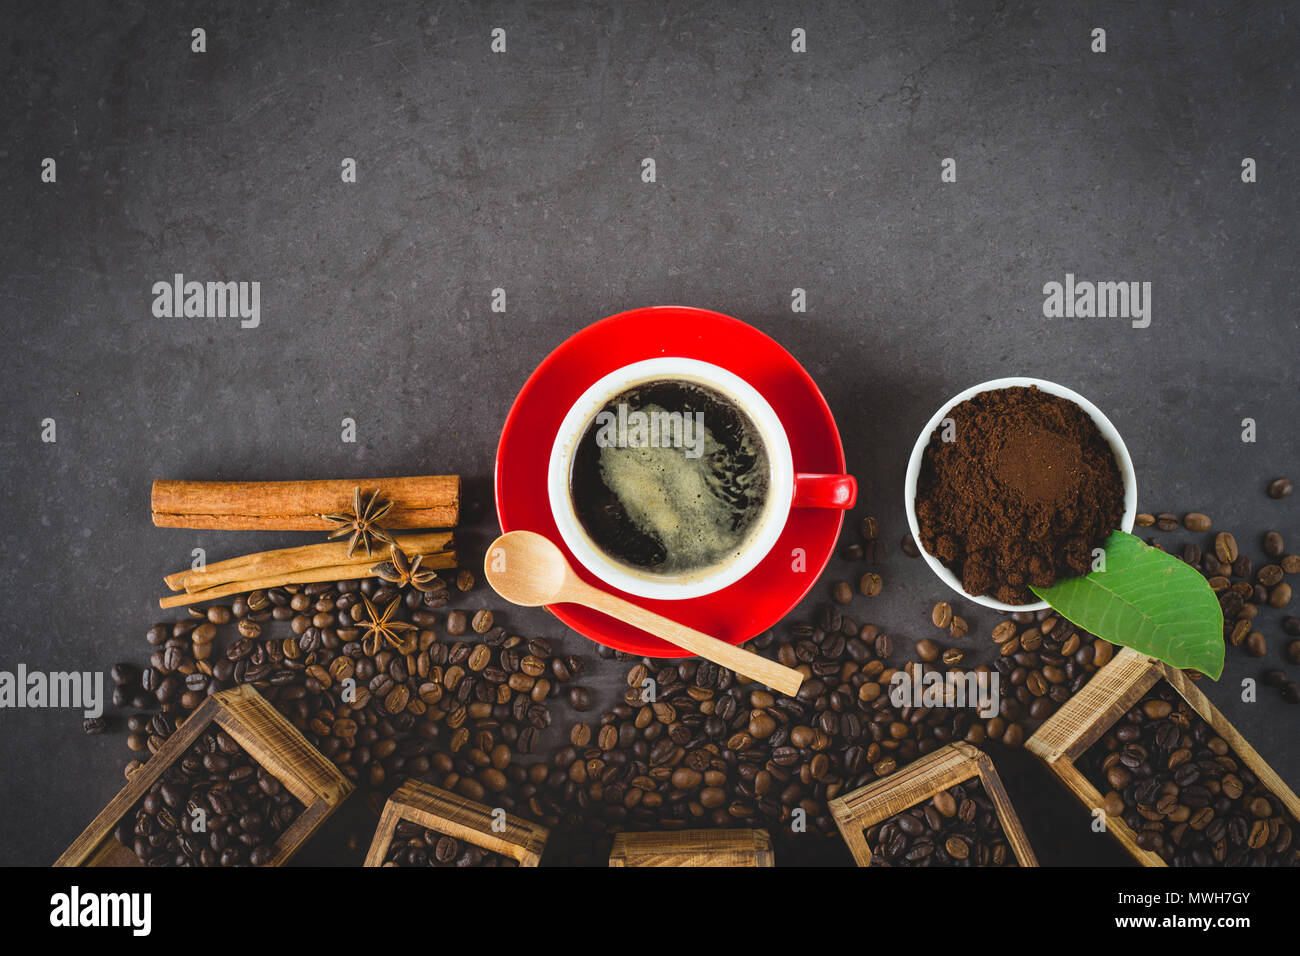 Black coffee  in a red cup with coffee bean decoration on stone table , flat lay image with copy space for your text Stock Photo